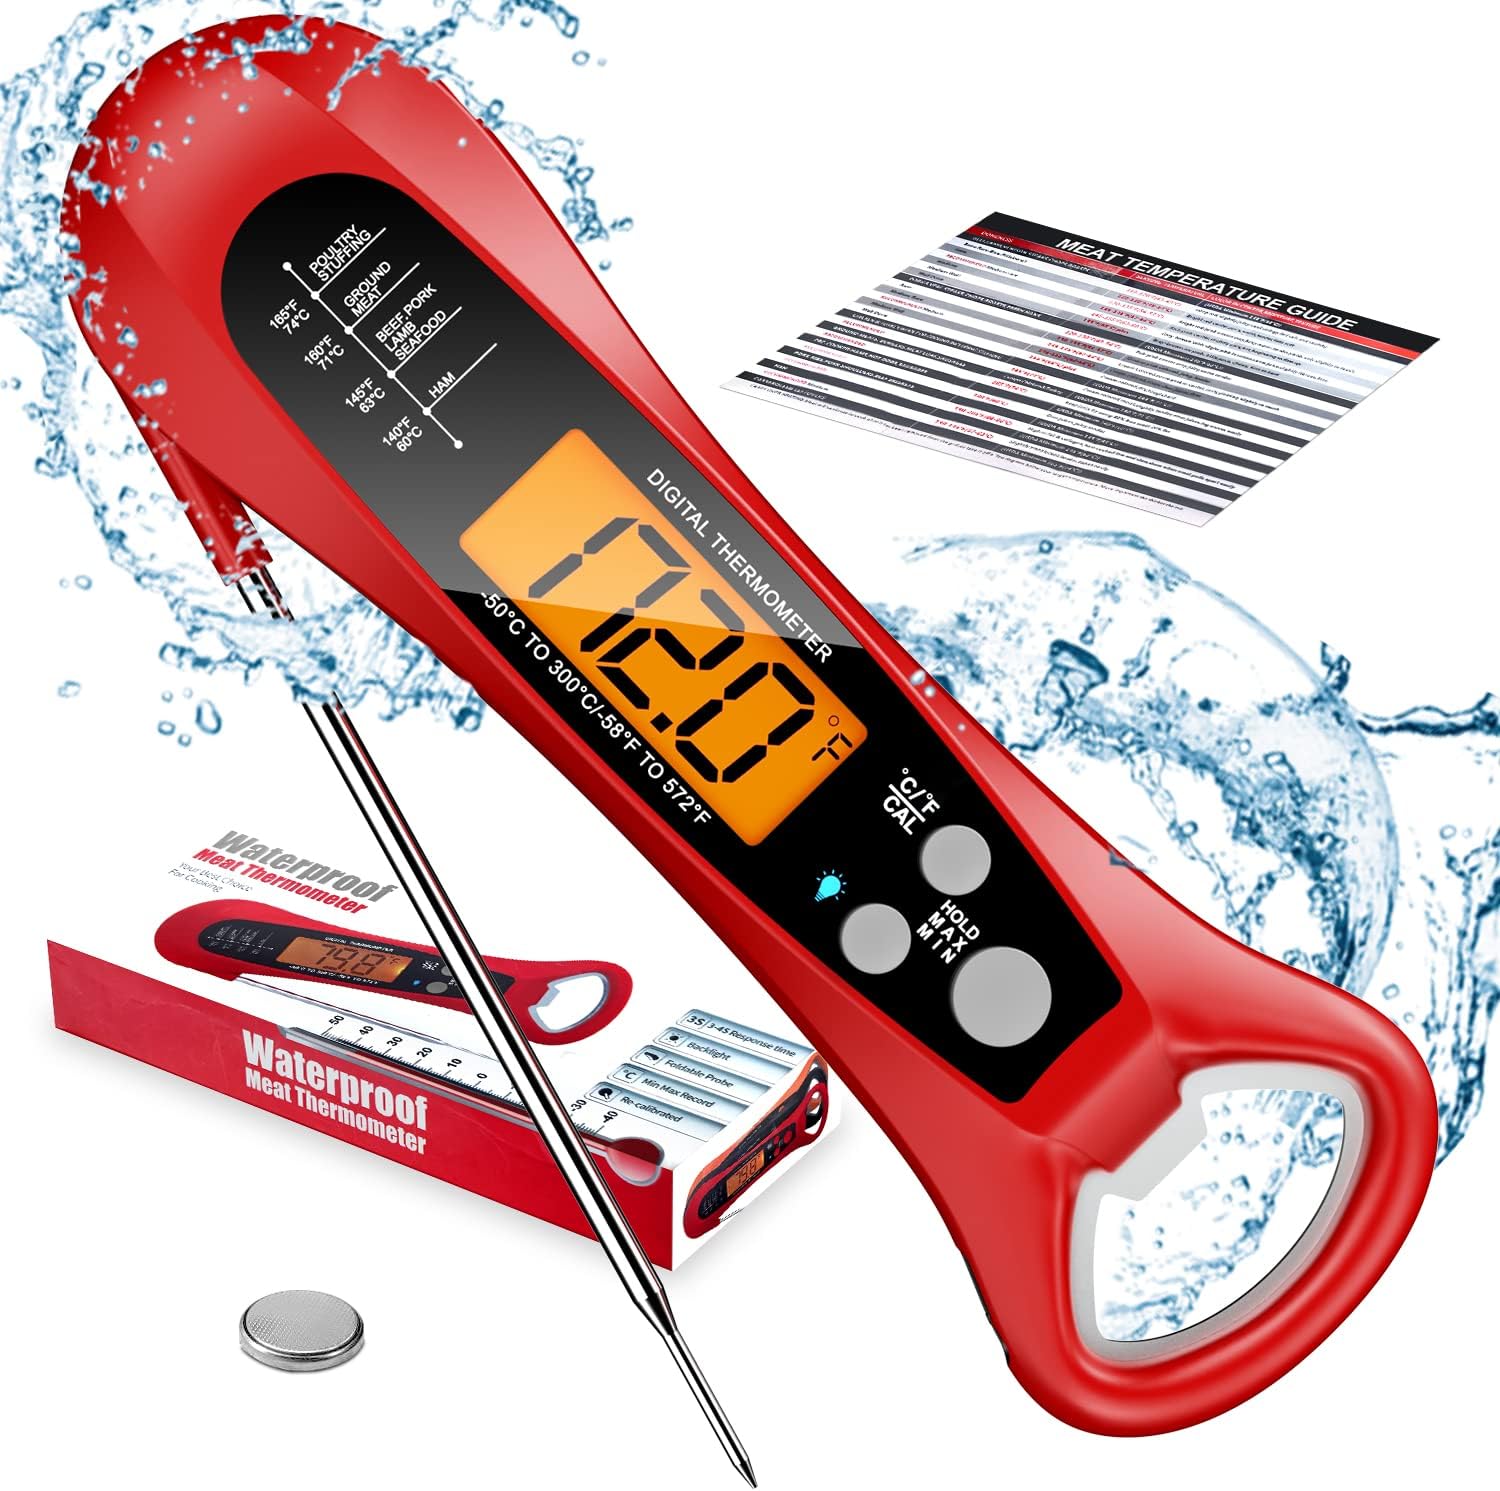 Instant Read Meat Thermometer for Cooking, Fast  Precise Digital Food Thermometer with Backlight, Magnet, Calibration, Foldable Probe, Waterproof Grill Thermometer for Deep Fry, BBQ, Roast Turkey